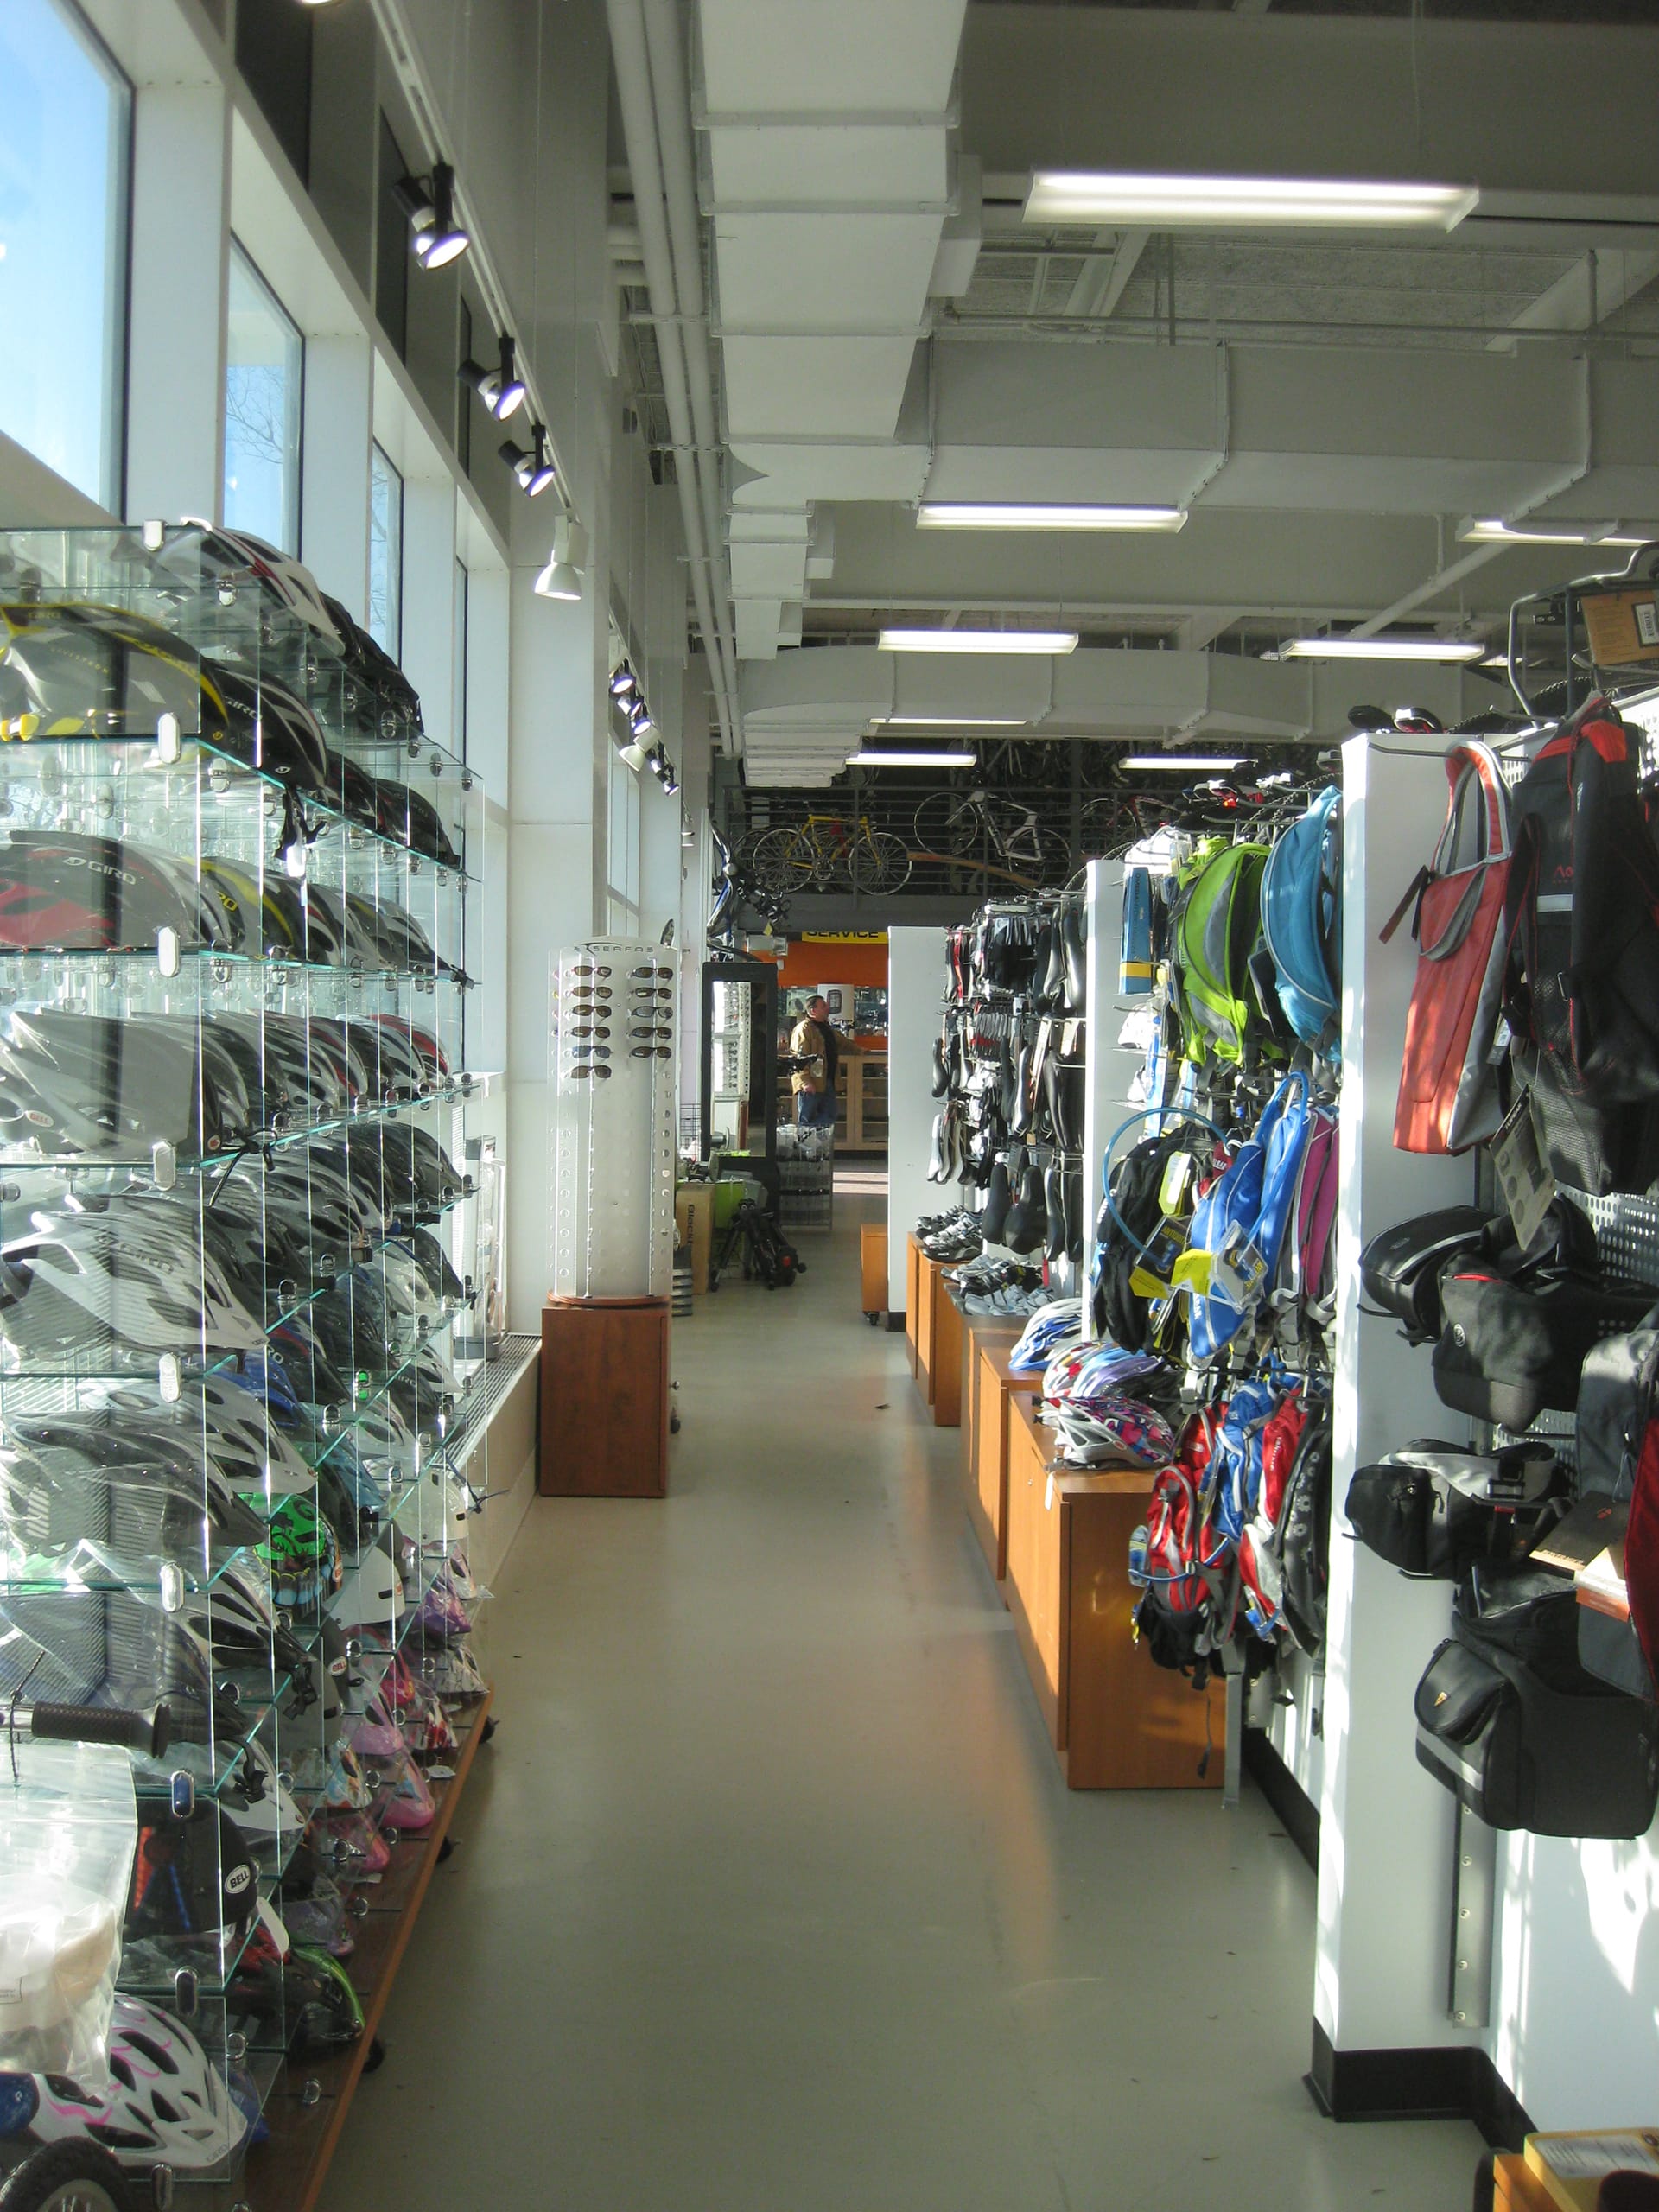 Rows of helmets, bags, and bike accessories in a bicycle shop.